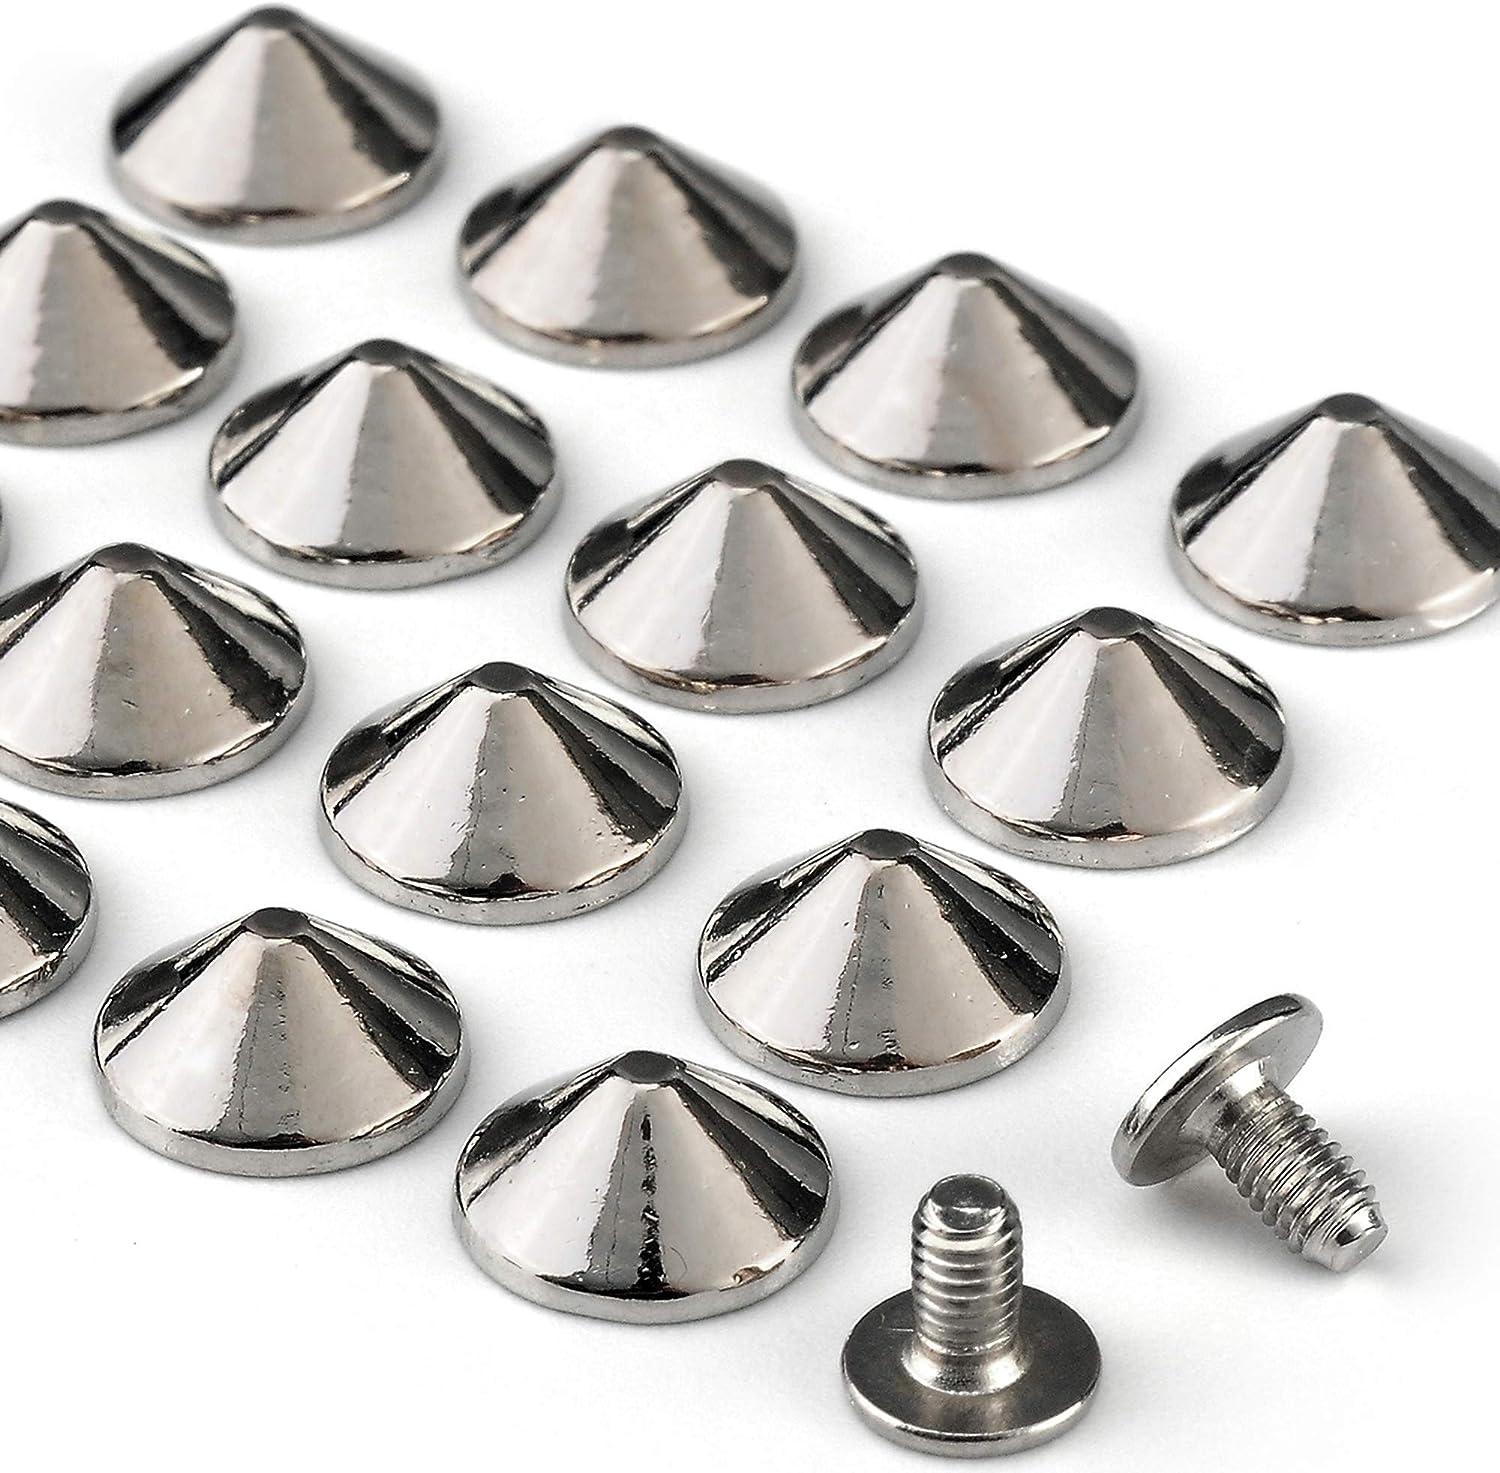 100x Punk Cone Metal Spikes Rivets Studs Screw Back for Clothing Jacket  Leather